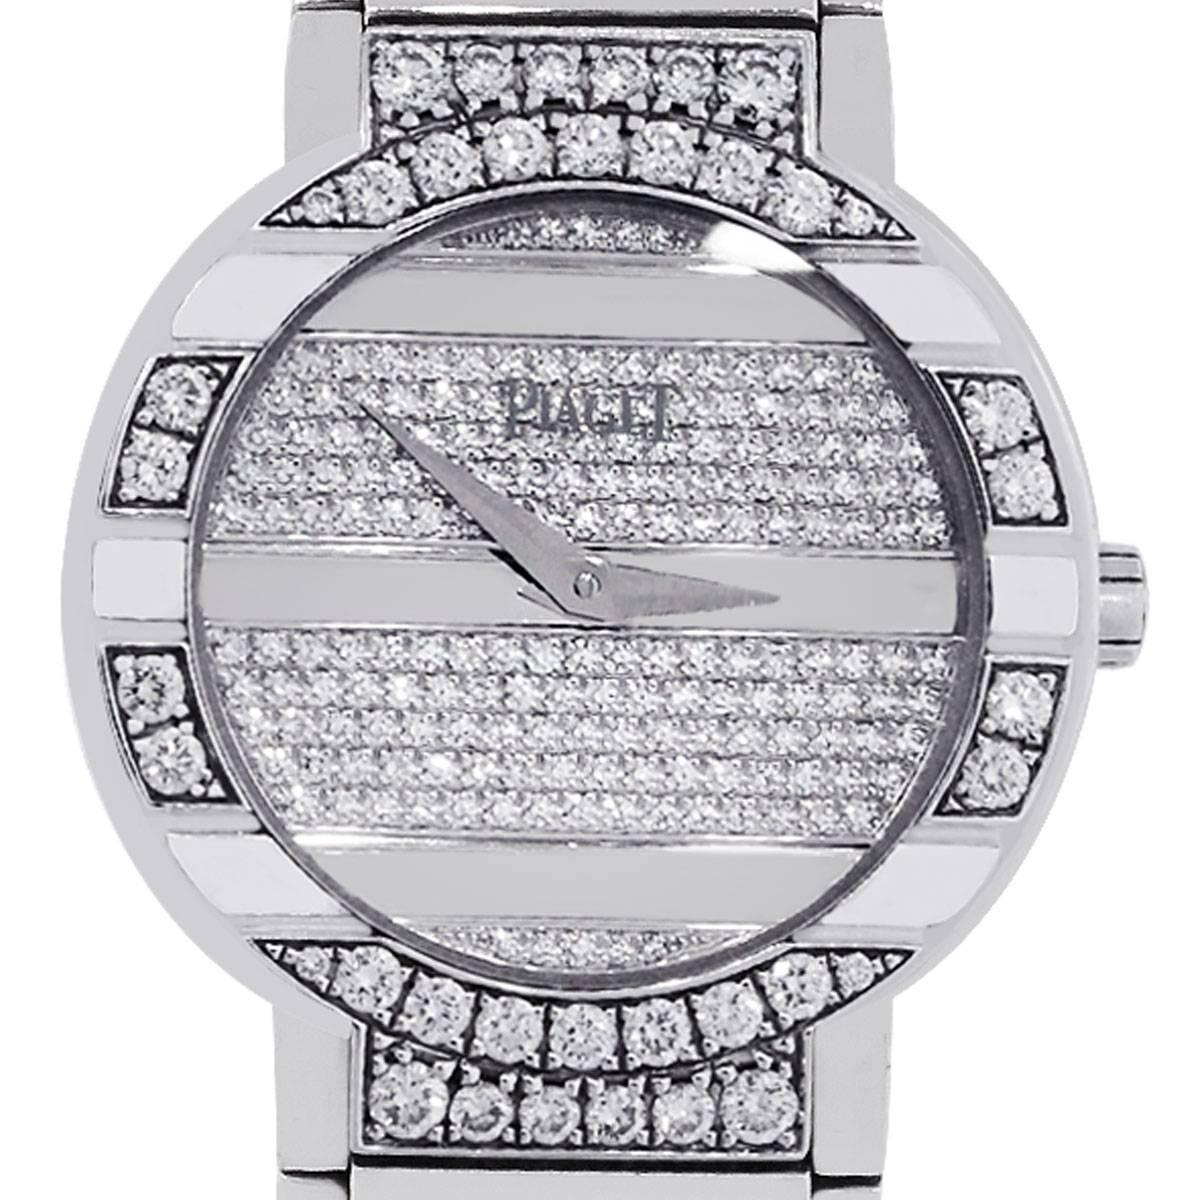 Brand: Piaget Polo
MPN: GOA29038
Case Material: 18k White Gold
Case Diameter: 28mm
Crystal: Sapphire
Bezel: Fixed diamond bezel
Dial: Diamond dial with white gold hour and minute markers. The diamonds on this watch are certified to be D-G in color